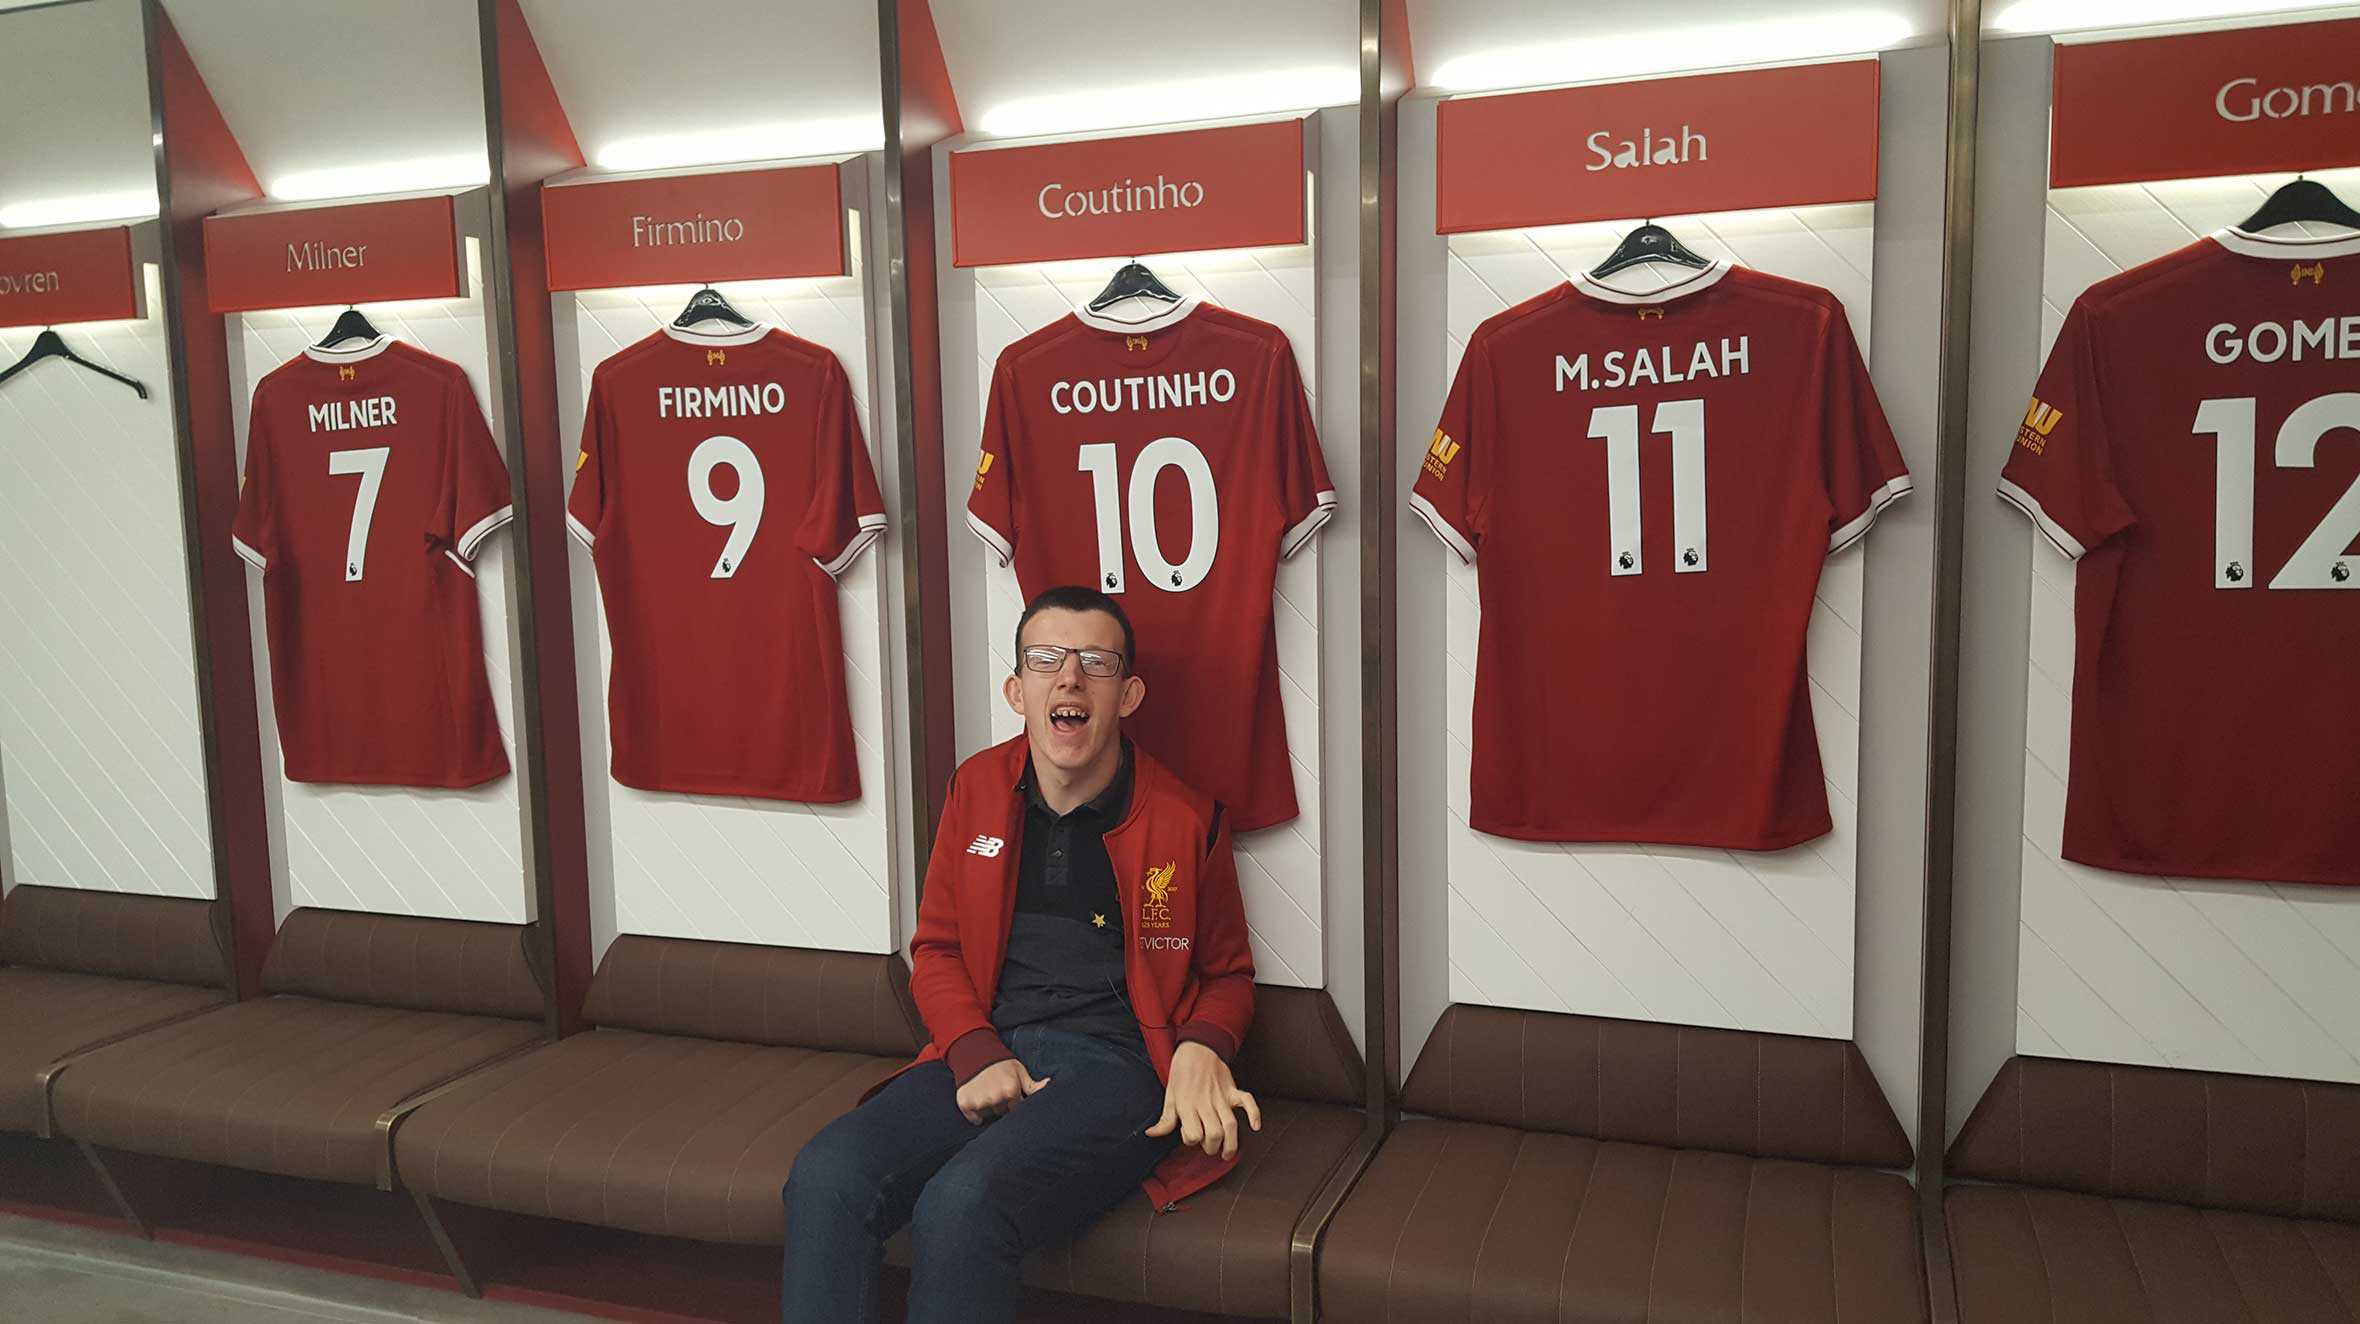 Loyd in the Liverpool dressing room